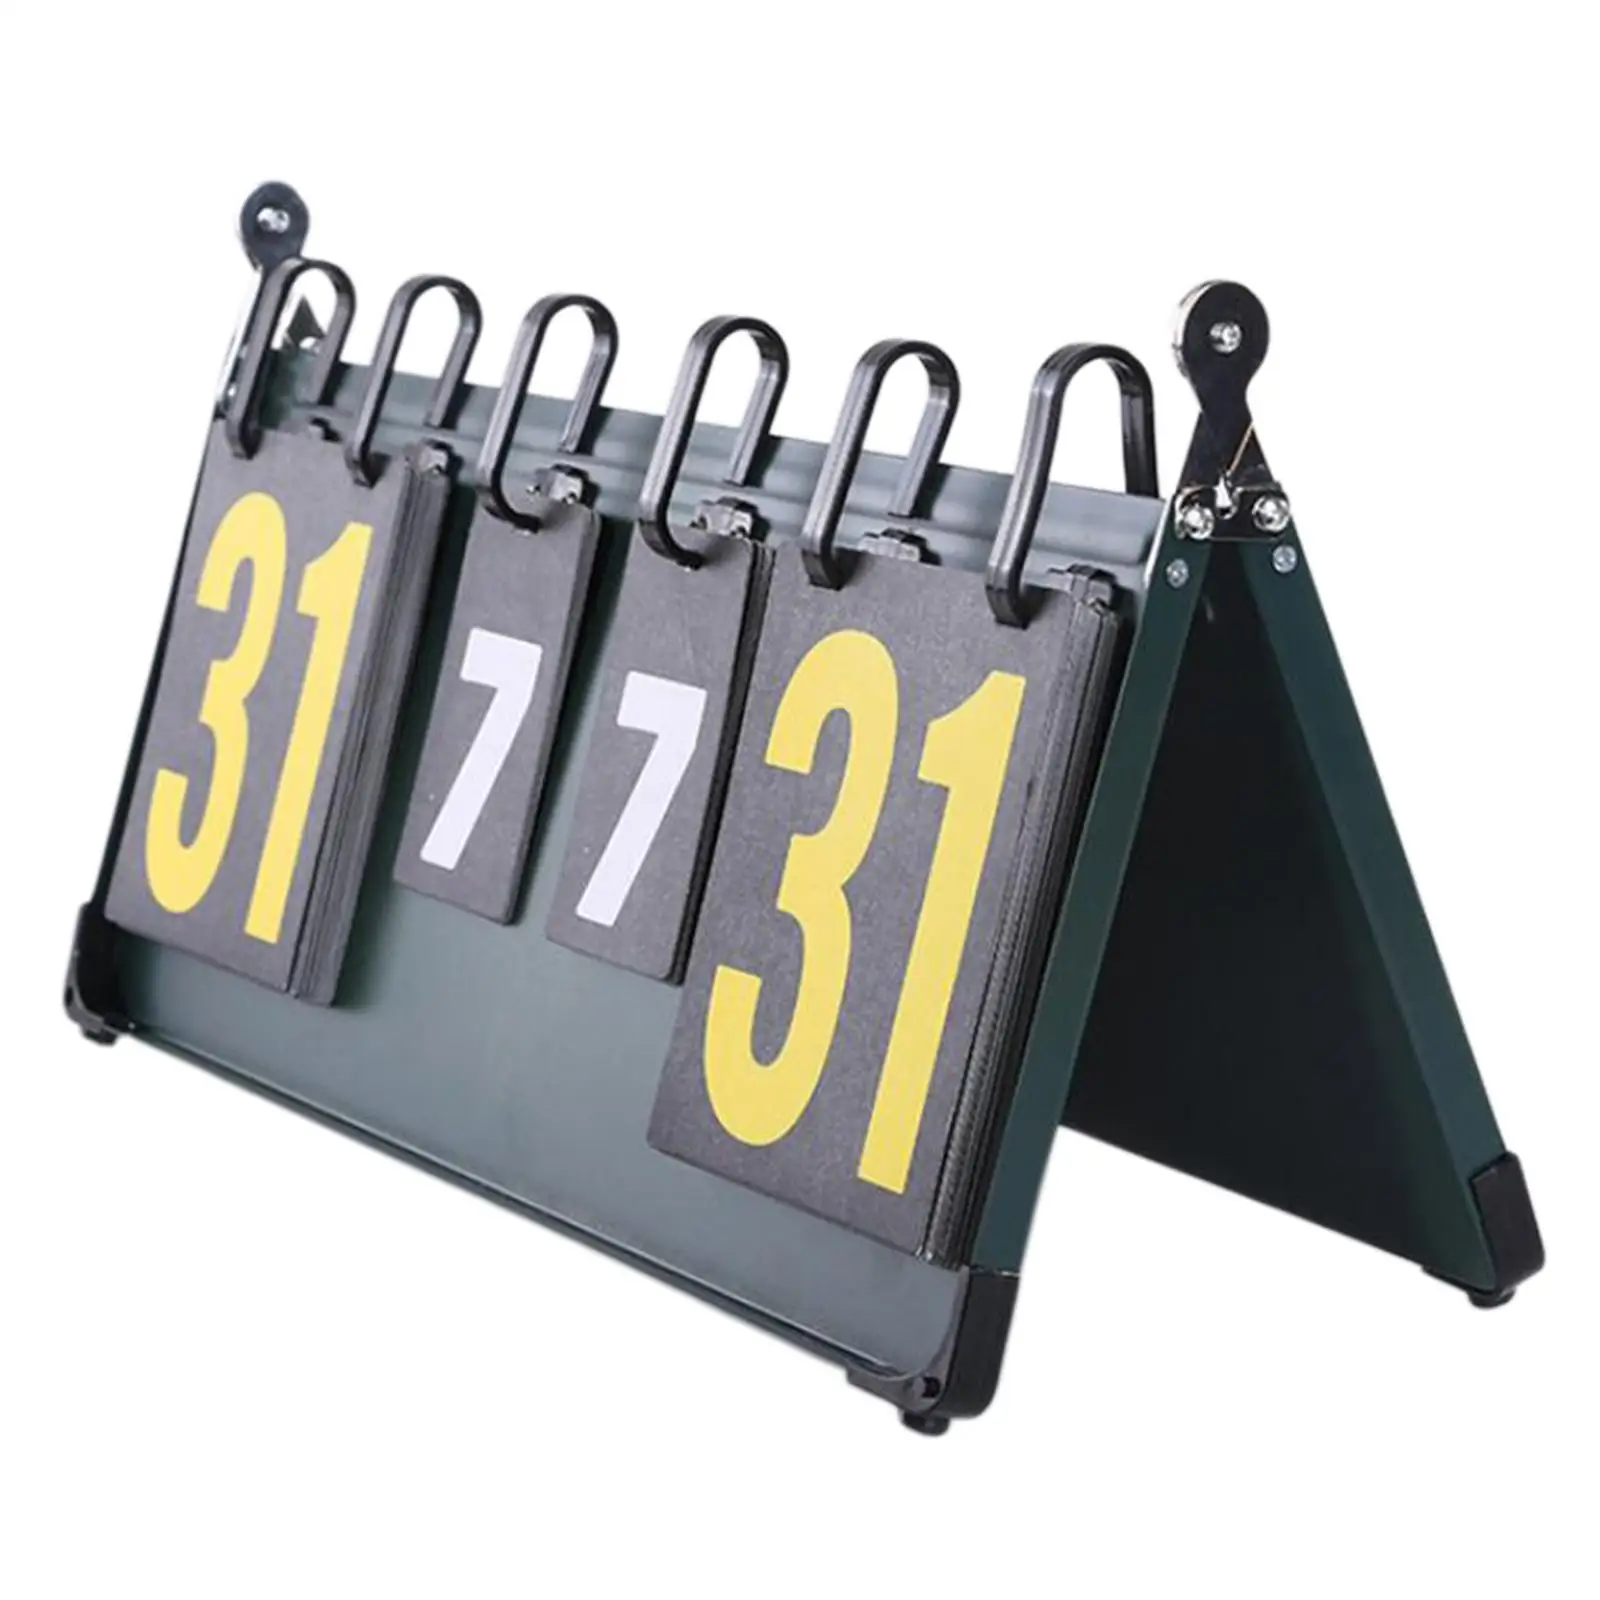 Tabletop Scoreboard Digital Professional Keeper for Basketball Volleyball Competition Tennis Indoor Outdoor Sports